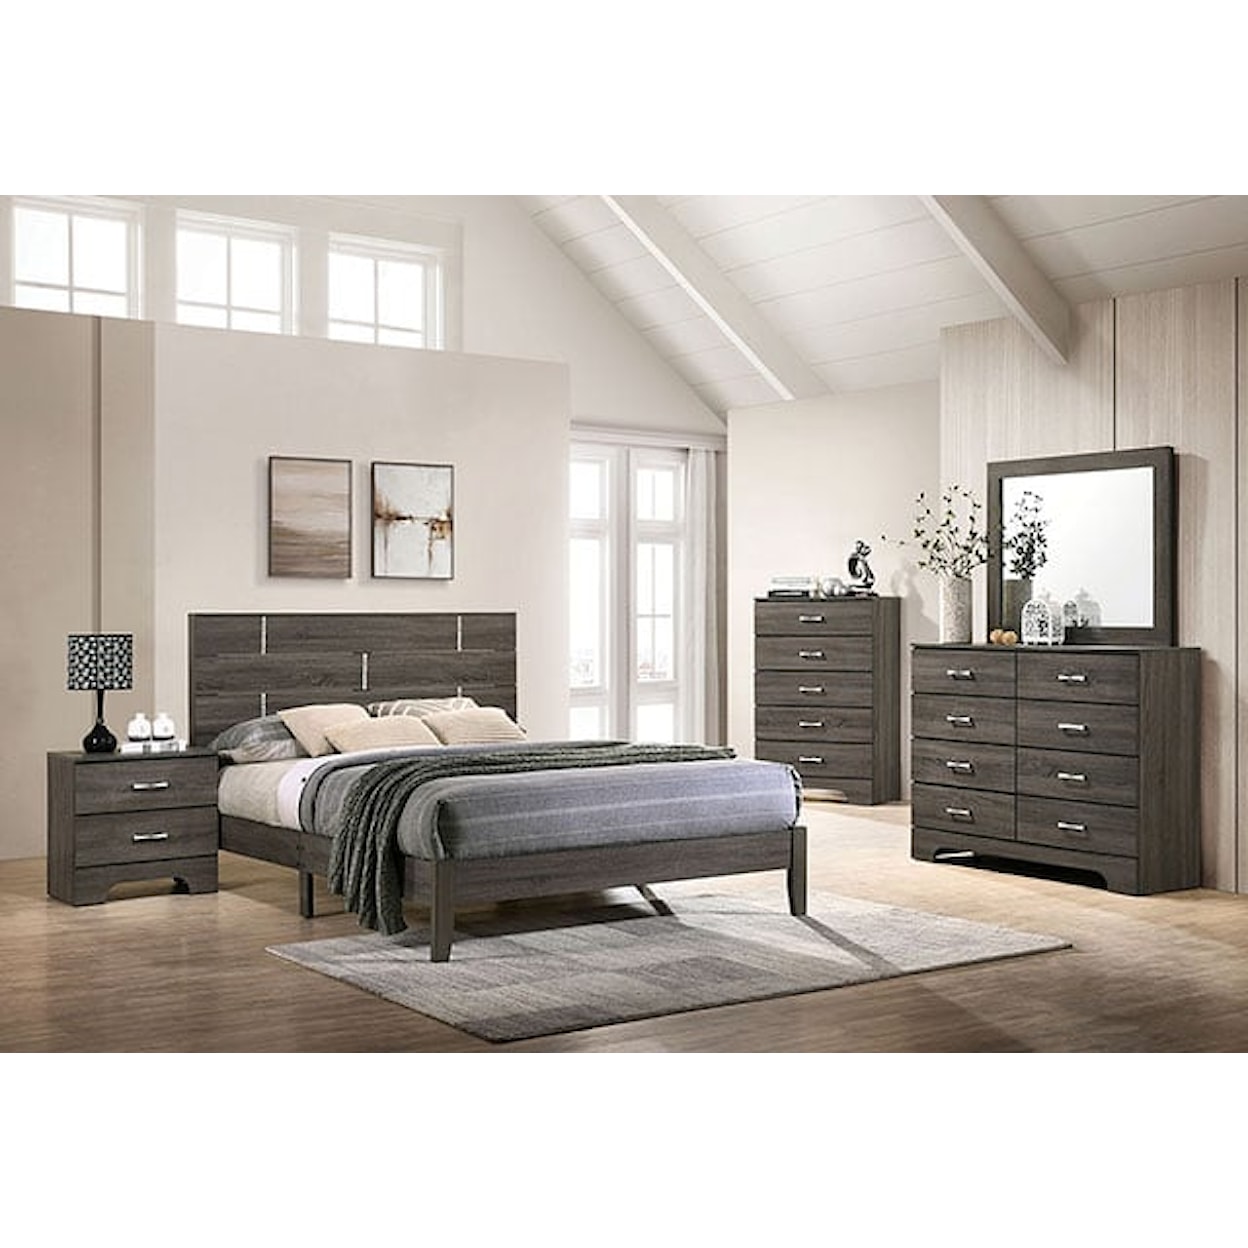 Furniture of America Richterswil Queen Low Platform Bed